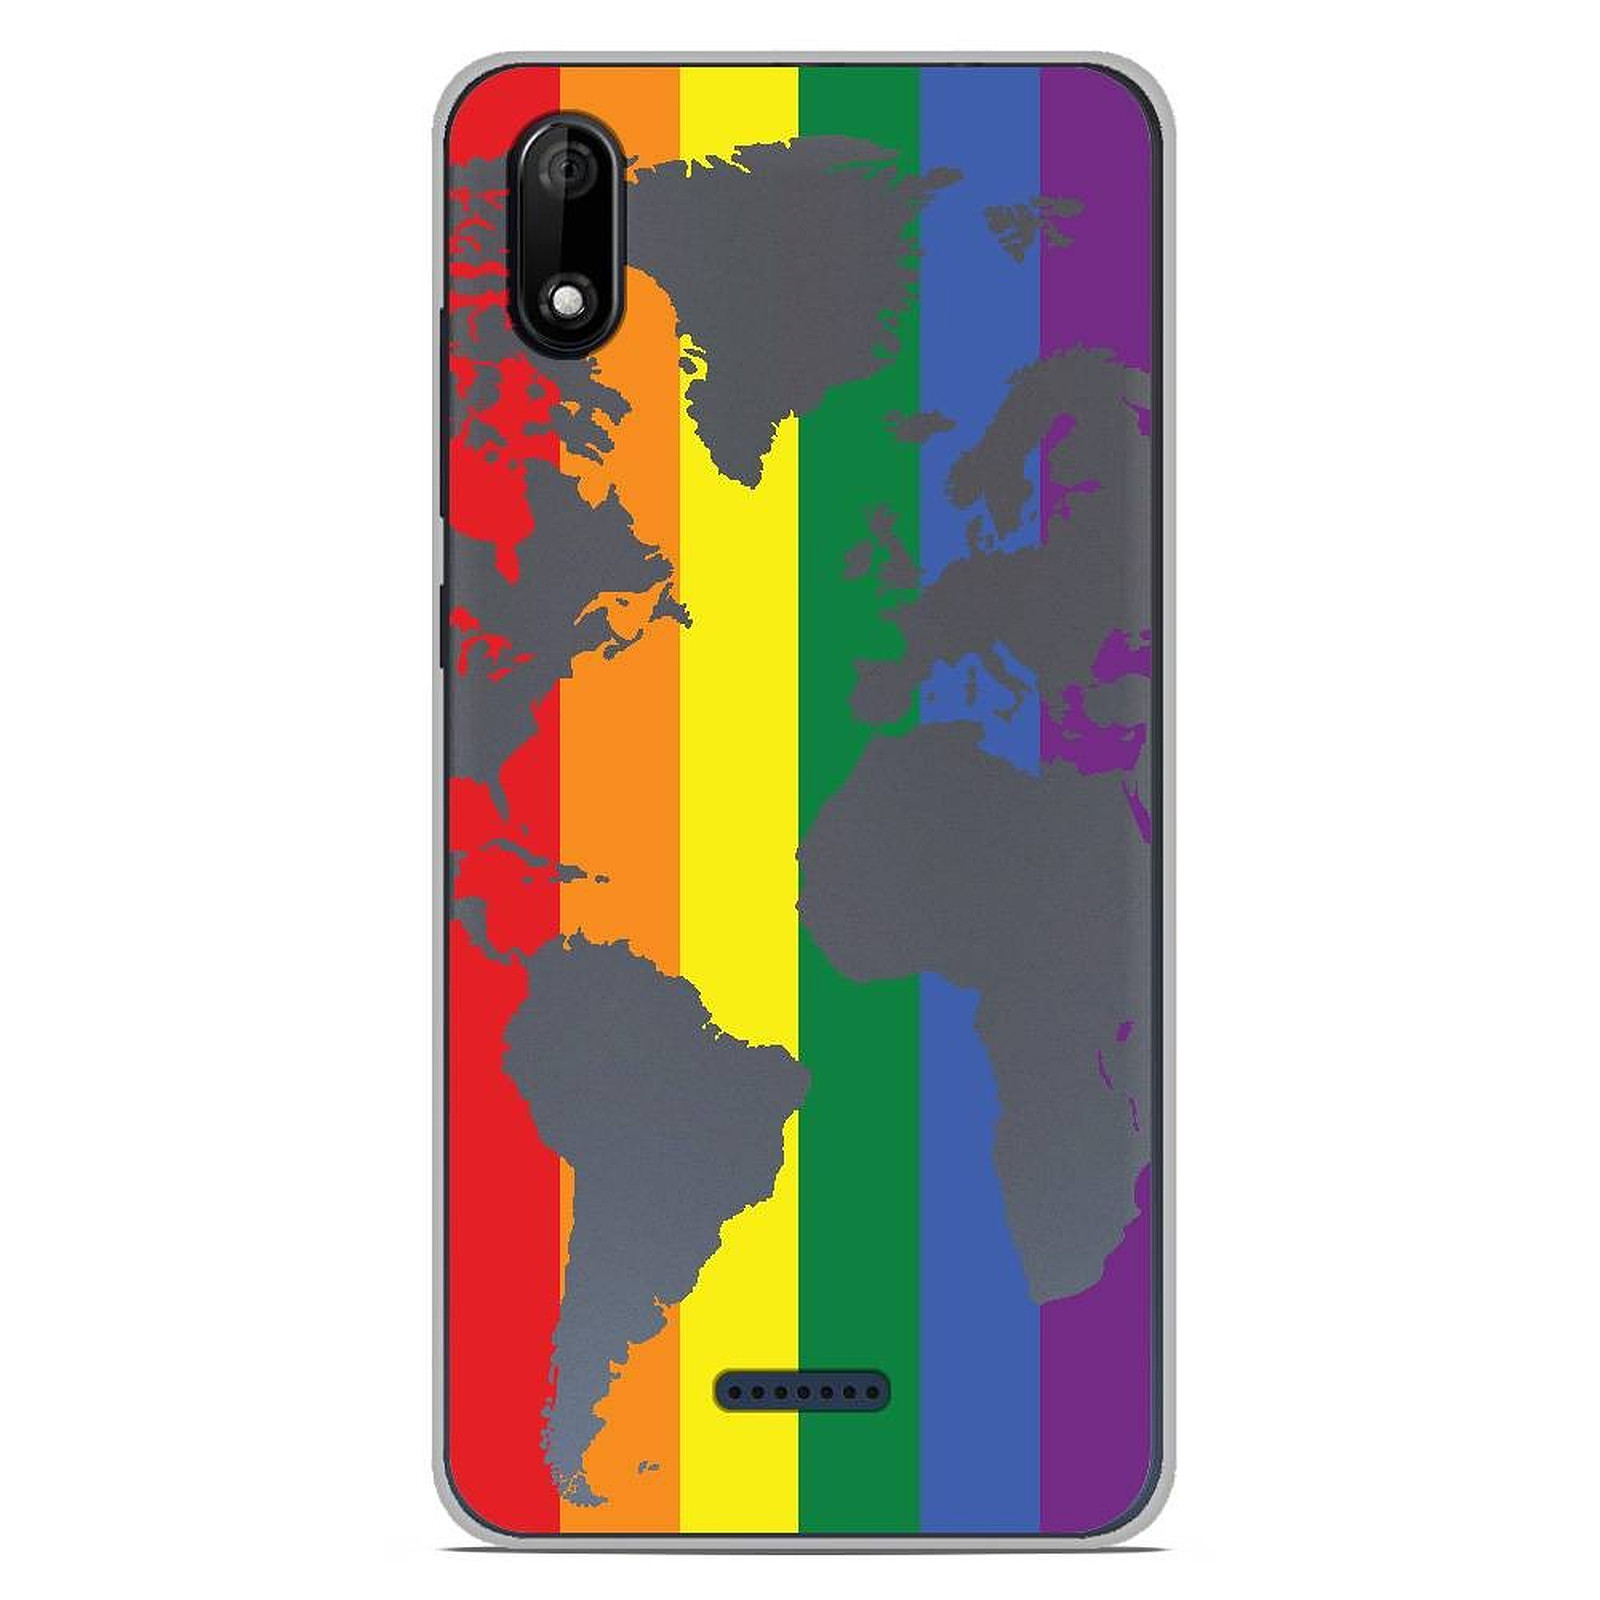 1001 Coques Coque silicone gel Wiko Y80 motif Map LGBT - Coque telephone 1001Coques